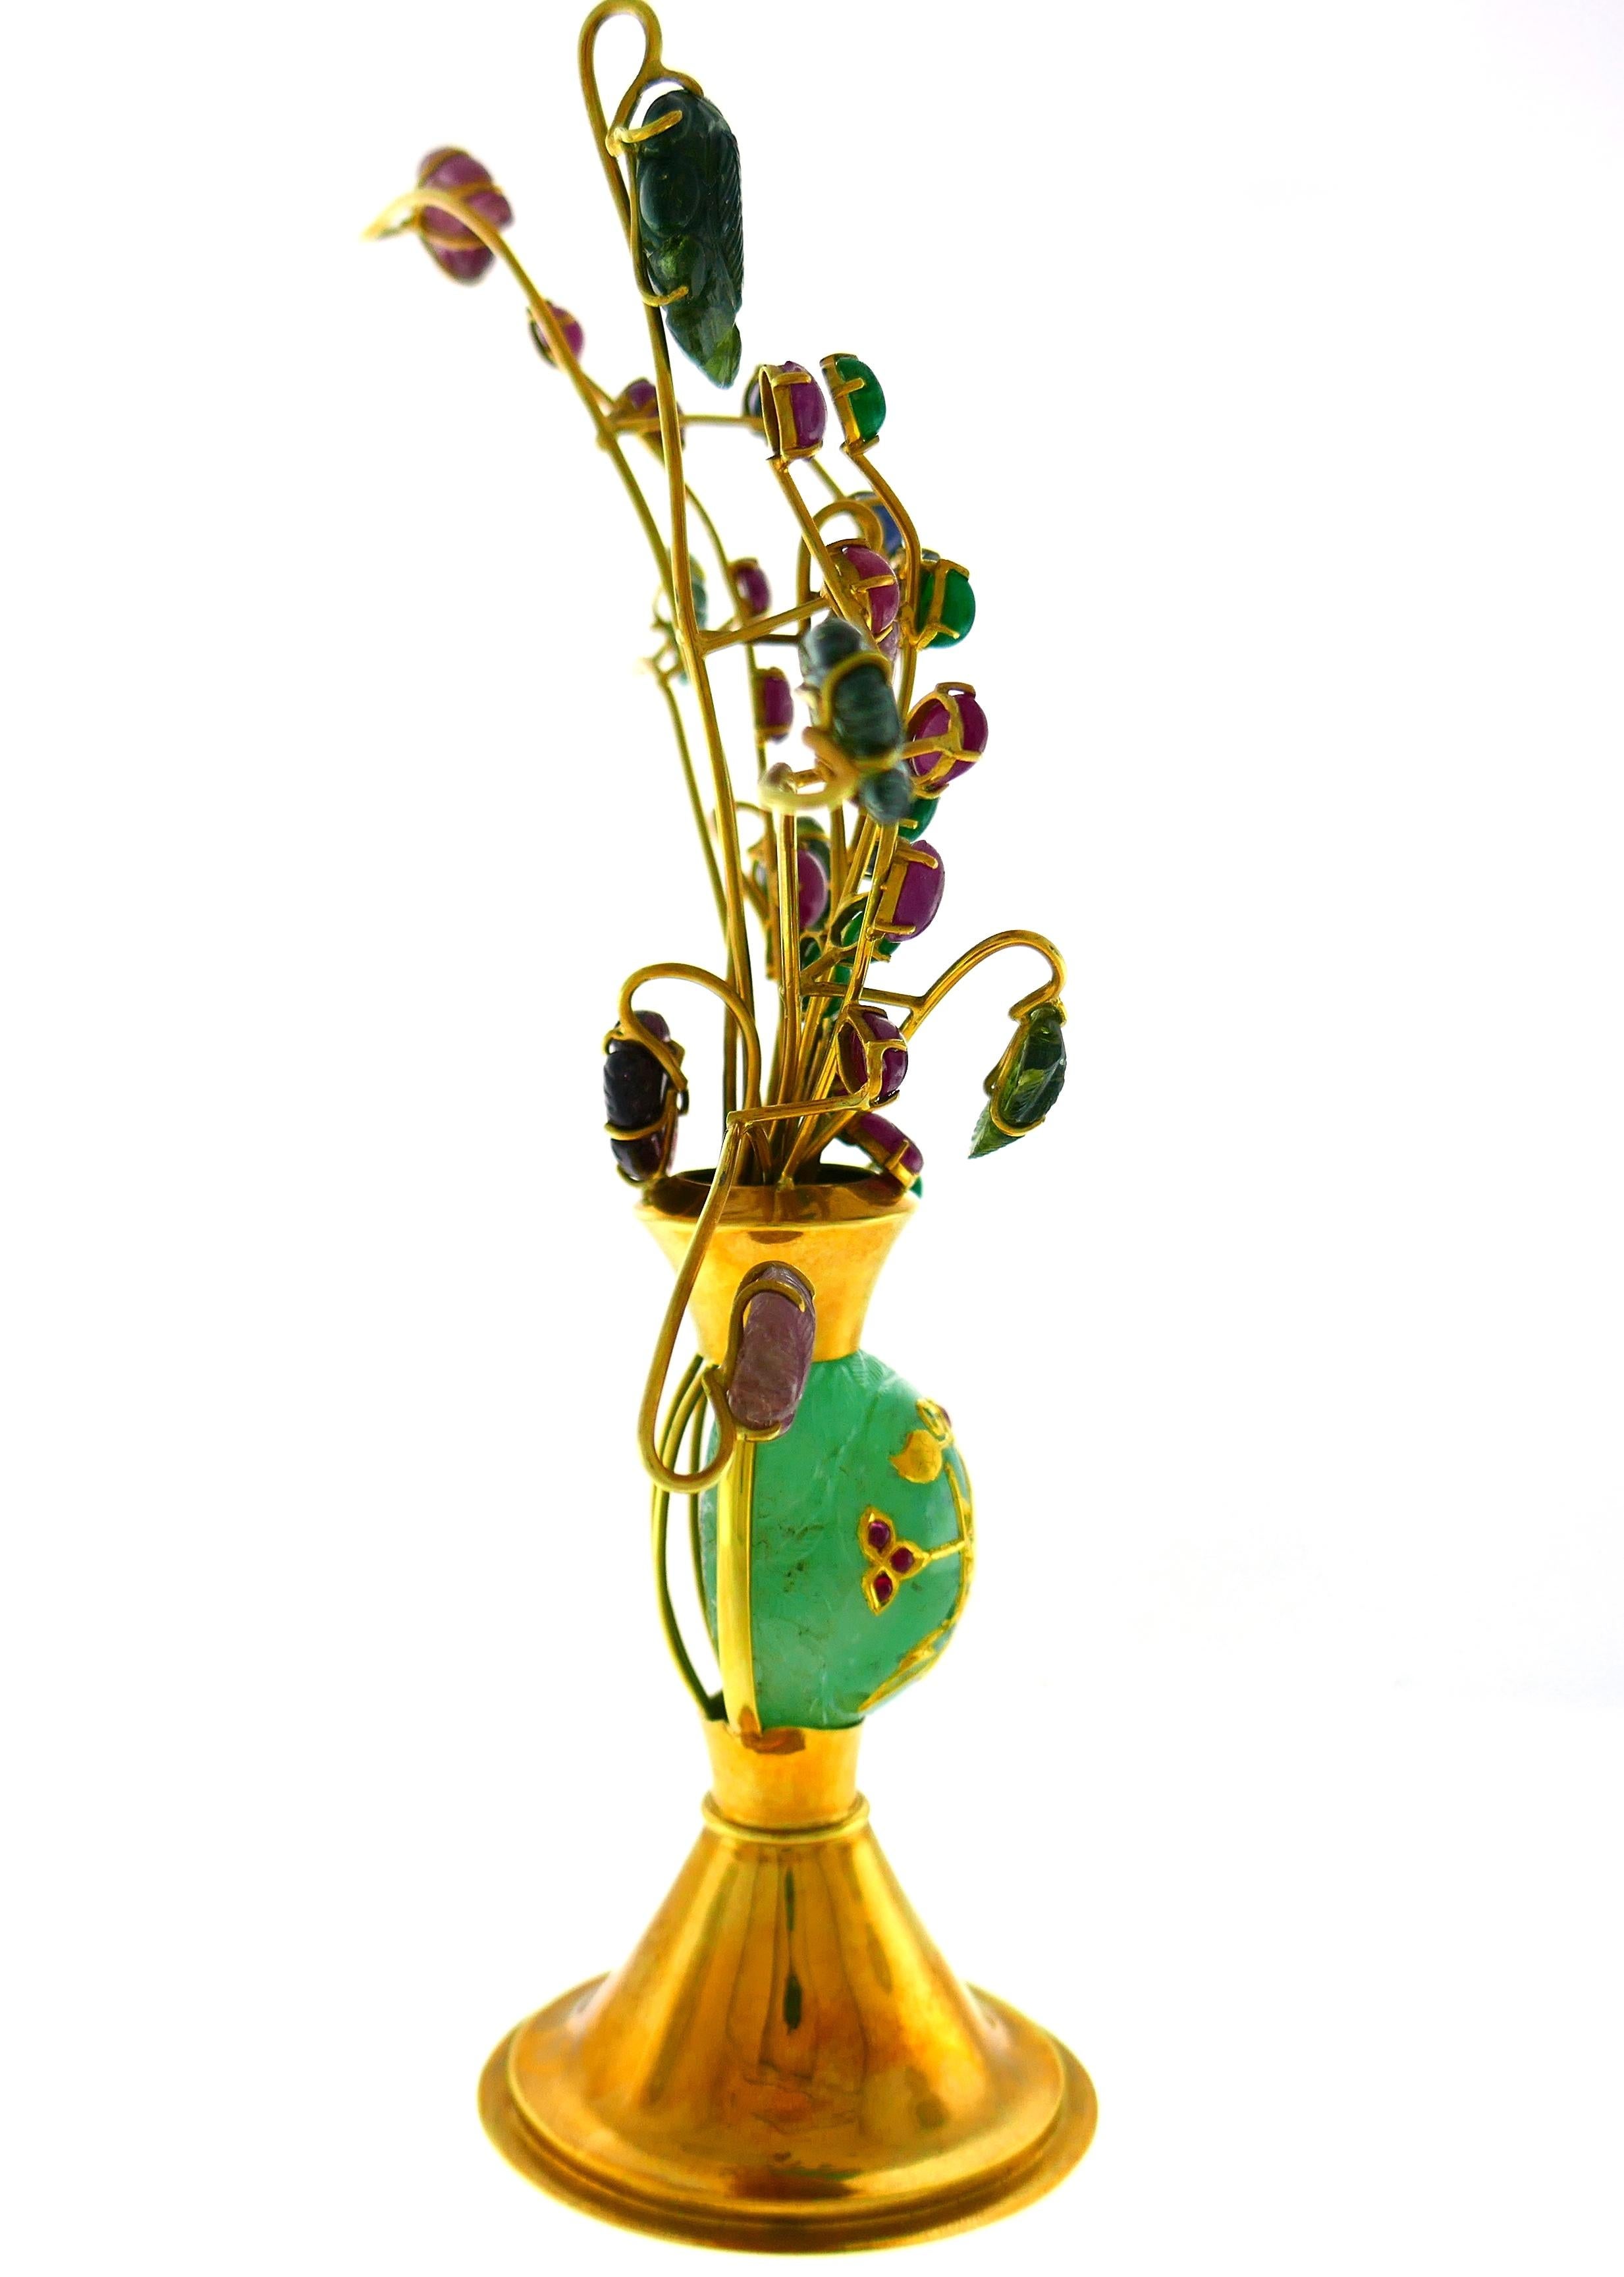 Exquisite desk accessory designed as a floor vase with a flower bouquet. It is made of 18 karat (stamped) yellow gold and carved and cabochon emerald, ruby, sapphire and green tourmaline.
Tastefully made, the piece is very pleasing to the